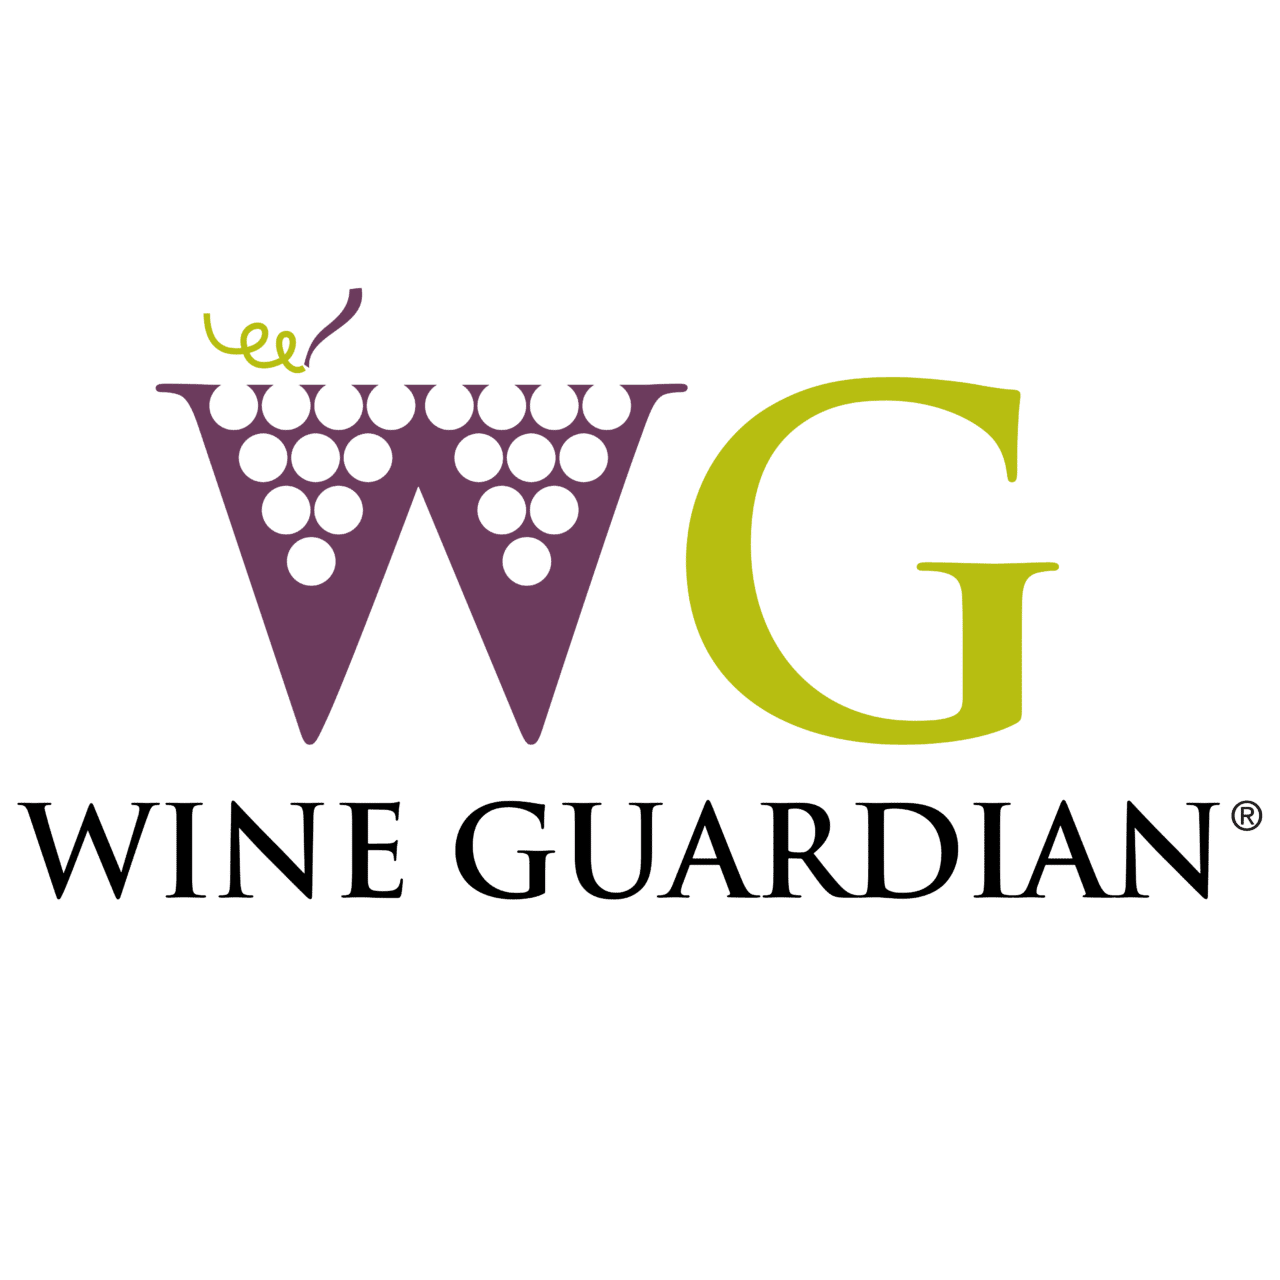 the offical logo of 'Wine Guardian'